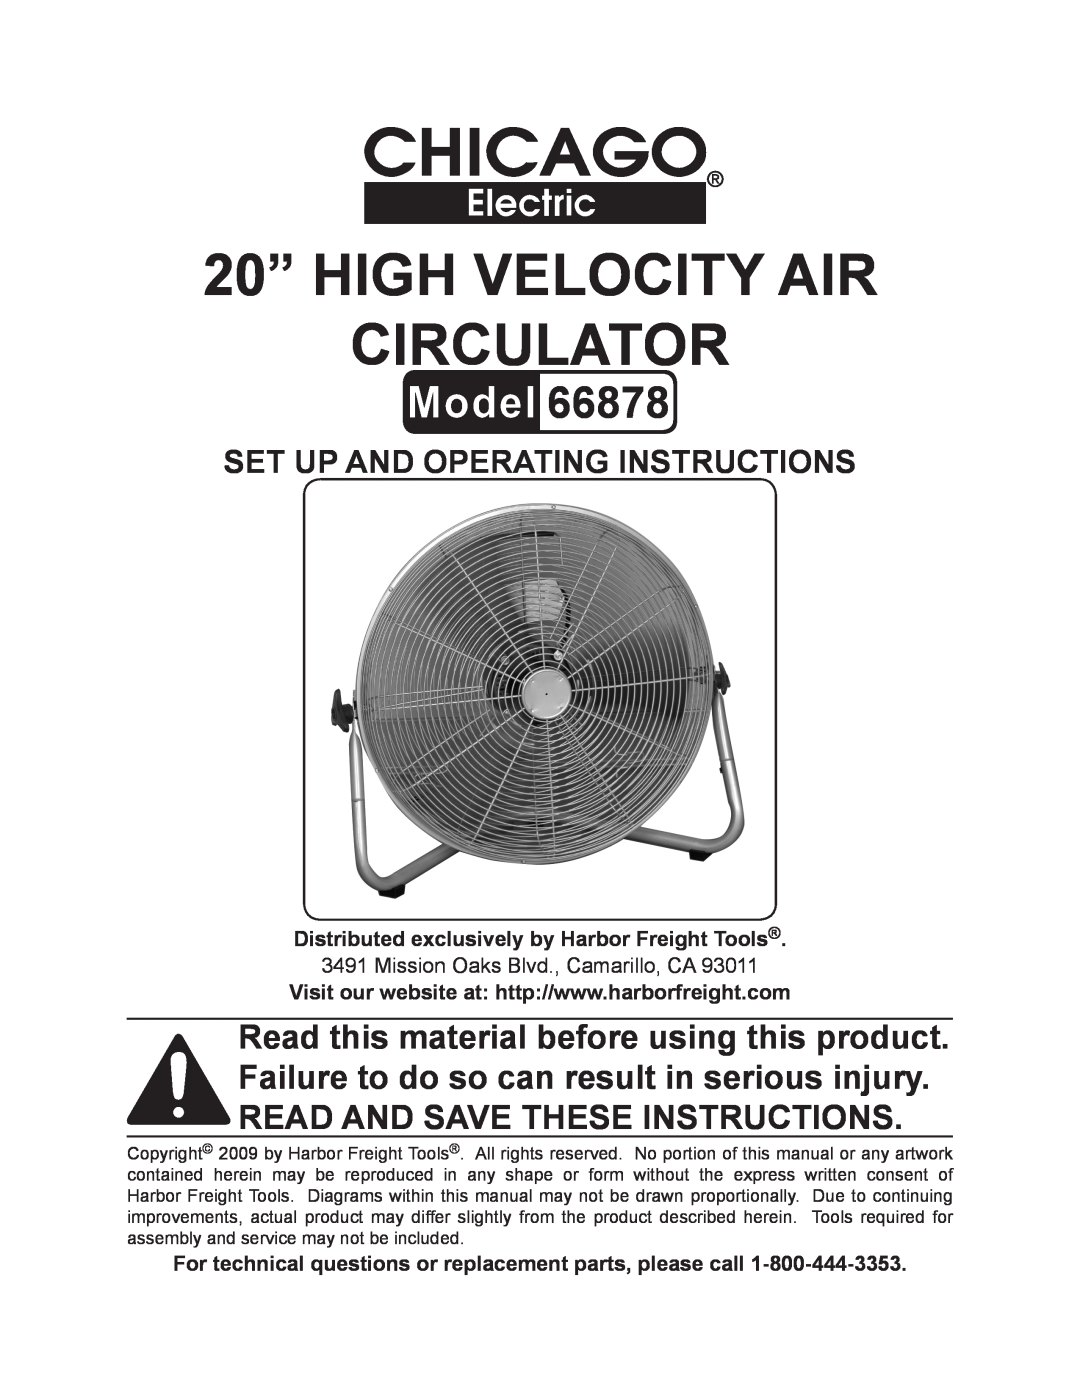 Chicago Electric 66878 manual Distributed exclusively by Harbor Freight Tools, 20” High velocity Air Circulator 